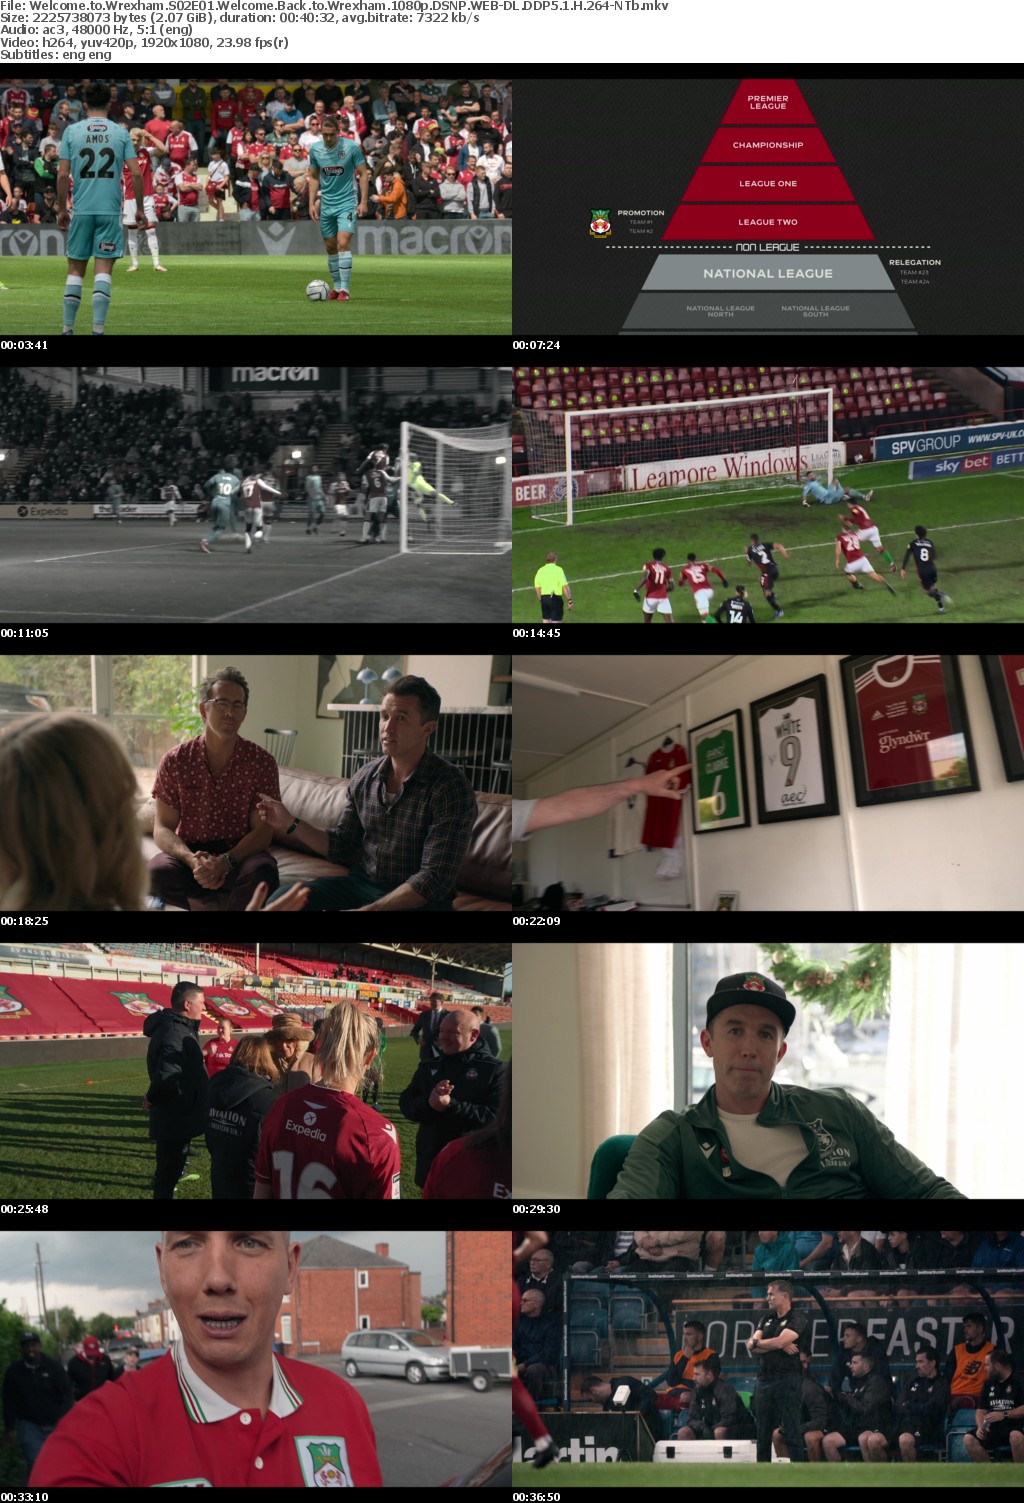 Welcome to Wrexham S02E01 Welcome Back to Wrexham 1080p DSNP WEB-DL DDP5 1 H 264-NTb